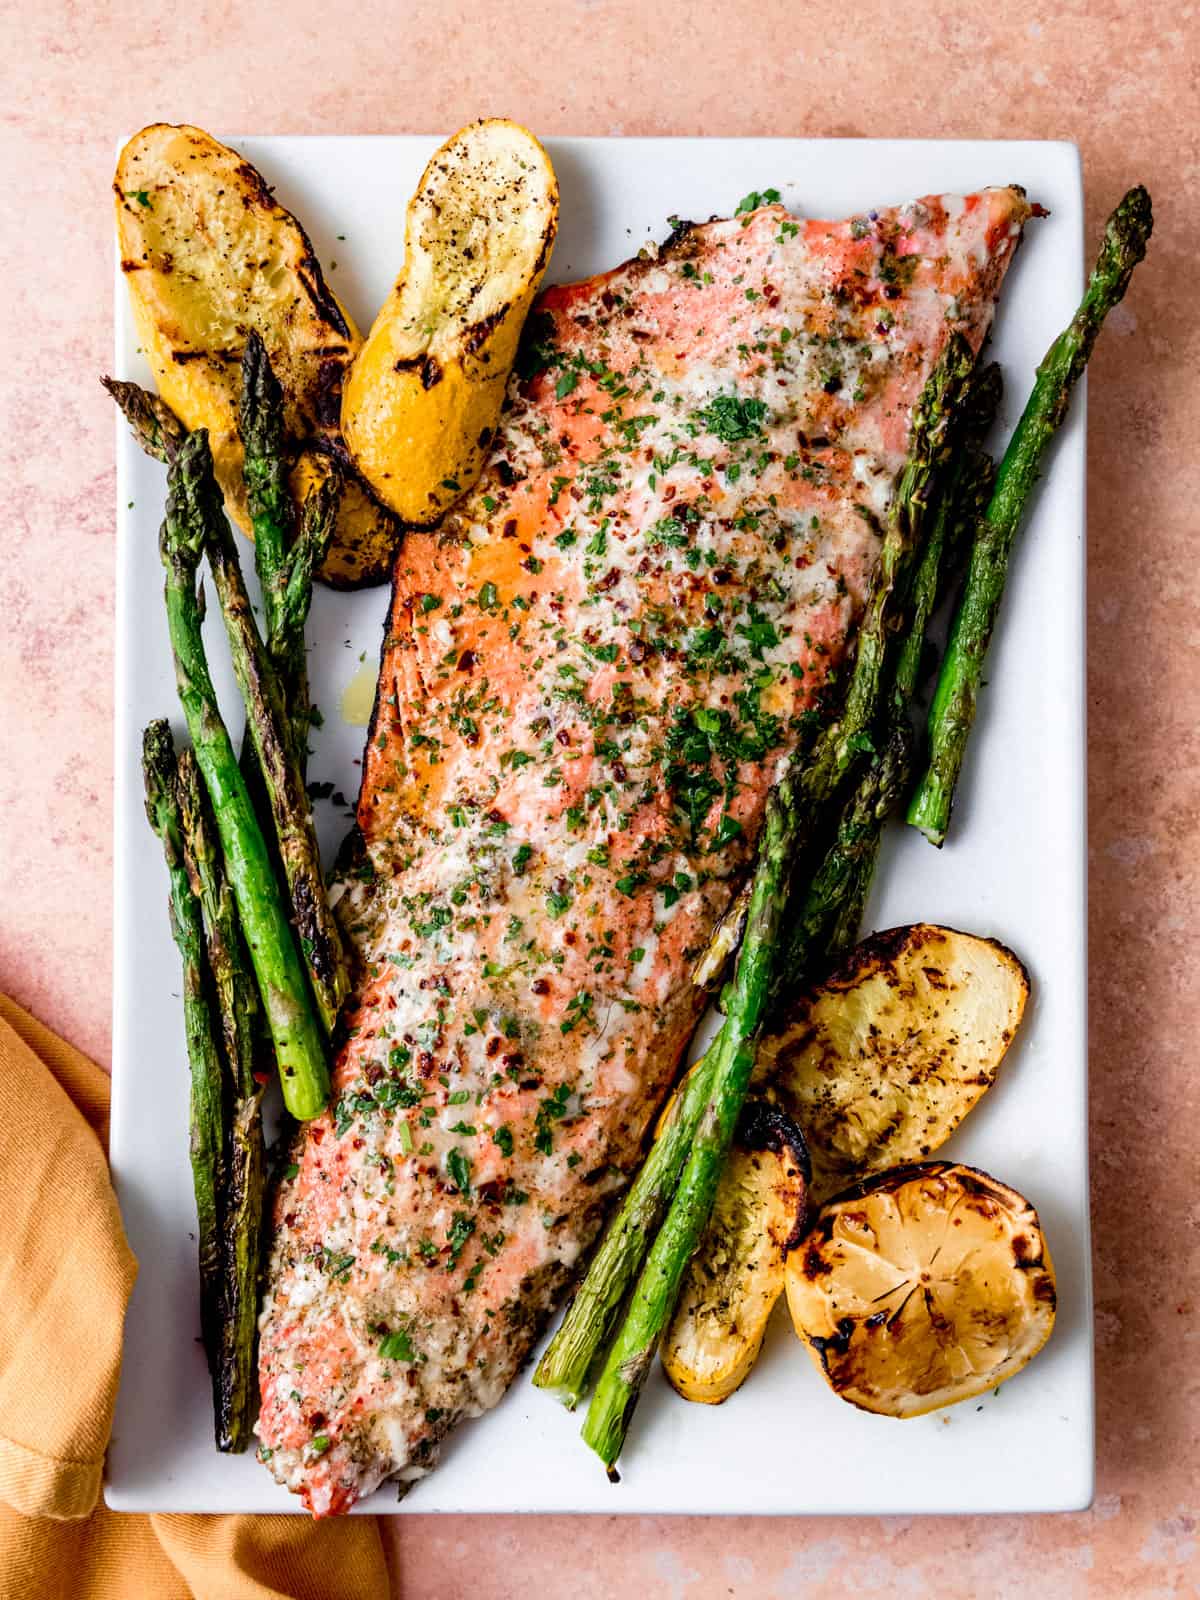 Grilled sockeye salmon recipe served with grilled asparagus and summer squash.